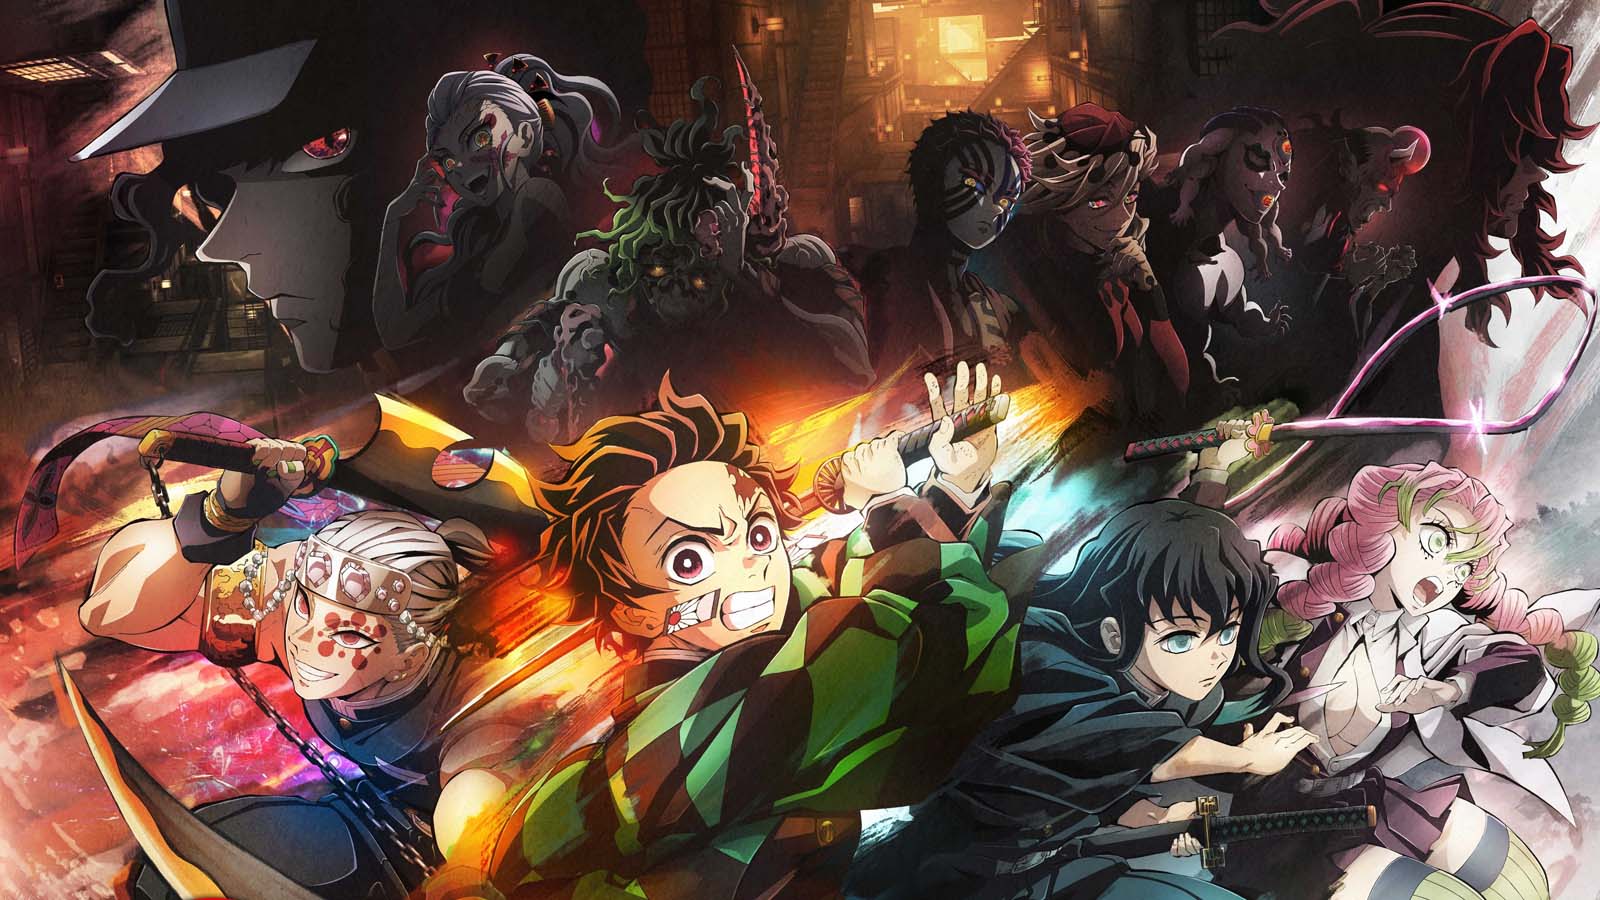 Demon Slayer watch order: How to watch the anime and movies in